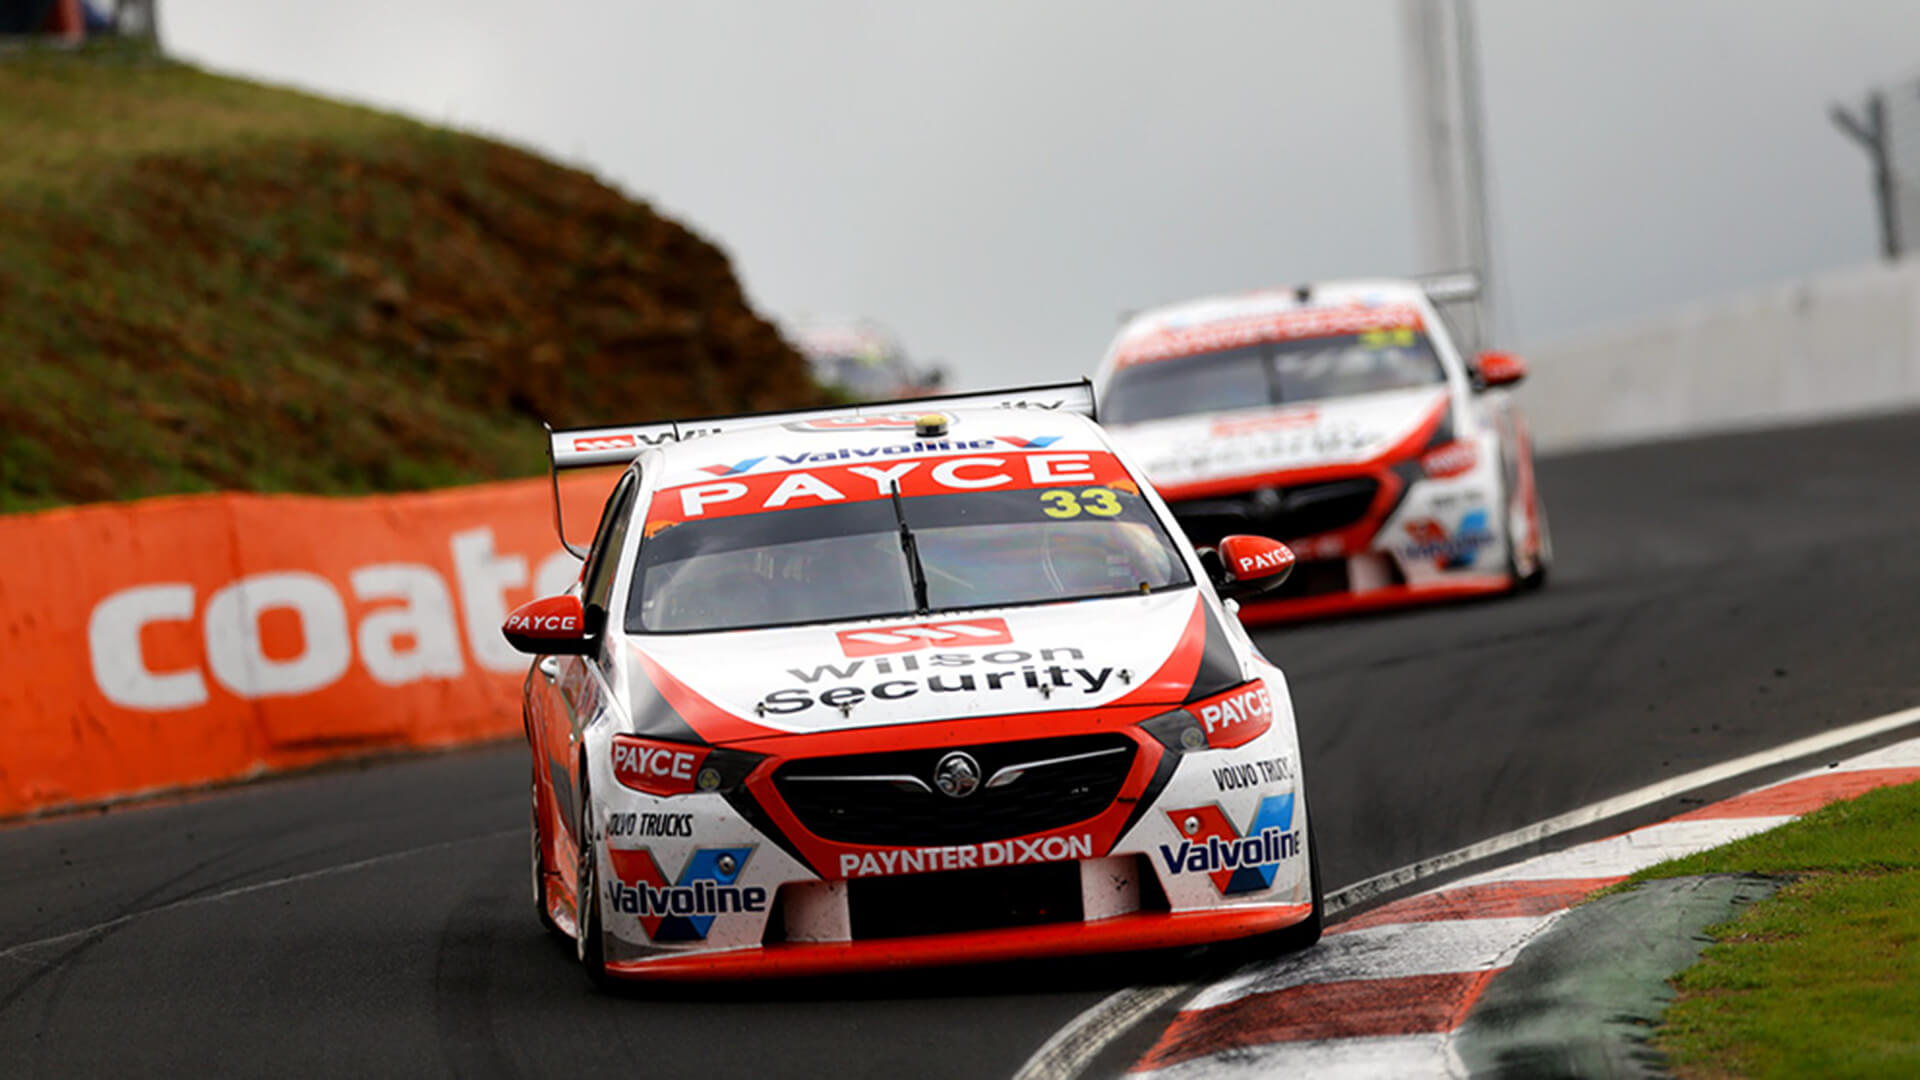 Strong performances by Team PAYCE at Bathurst 1000 races